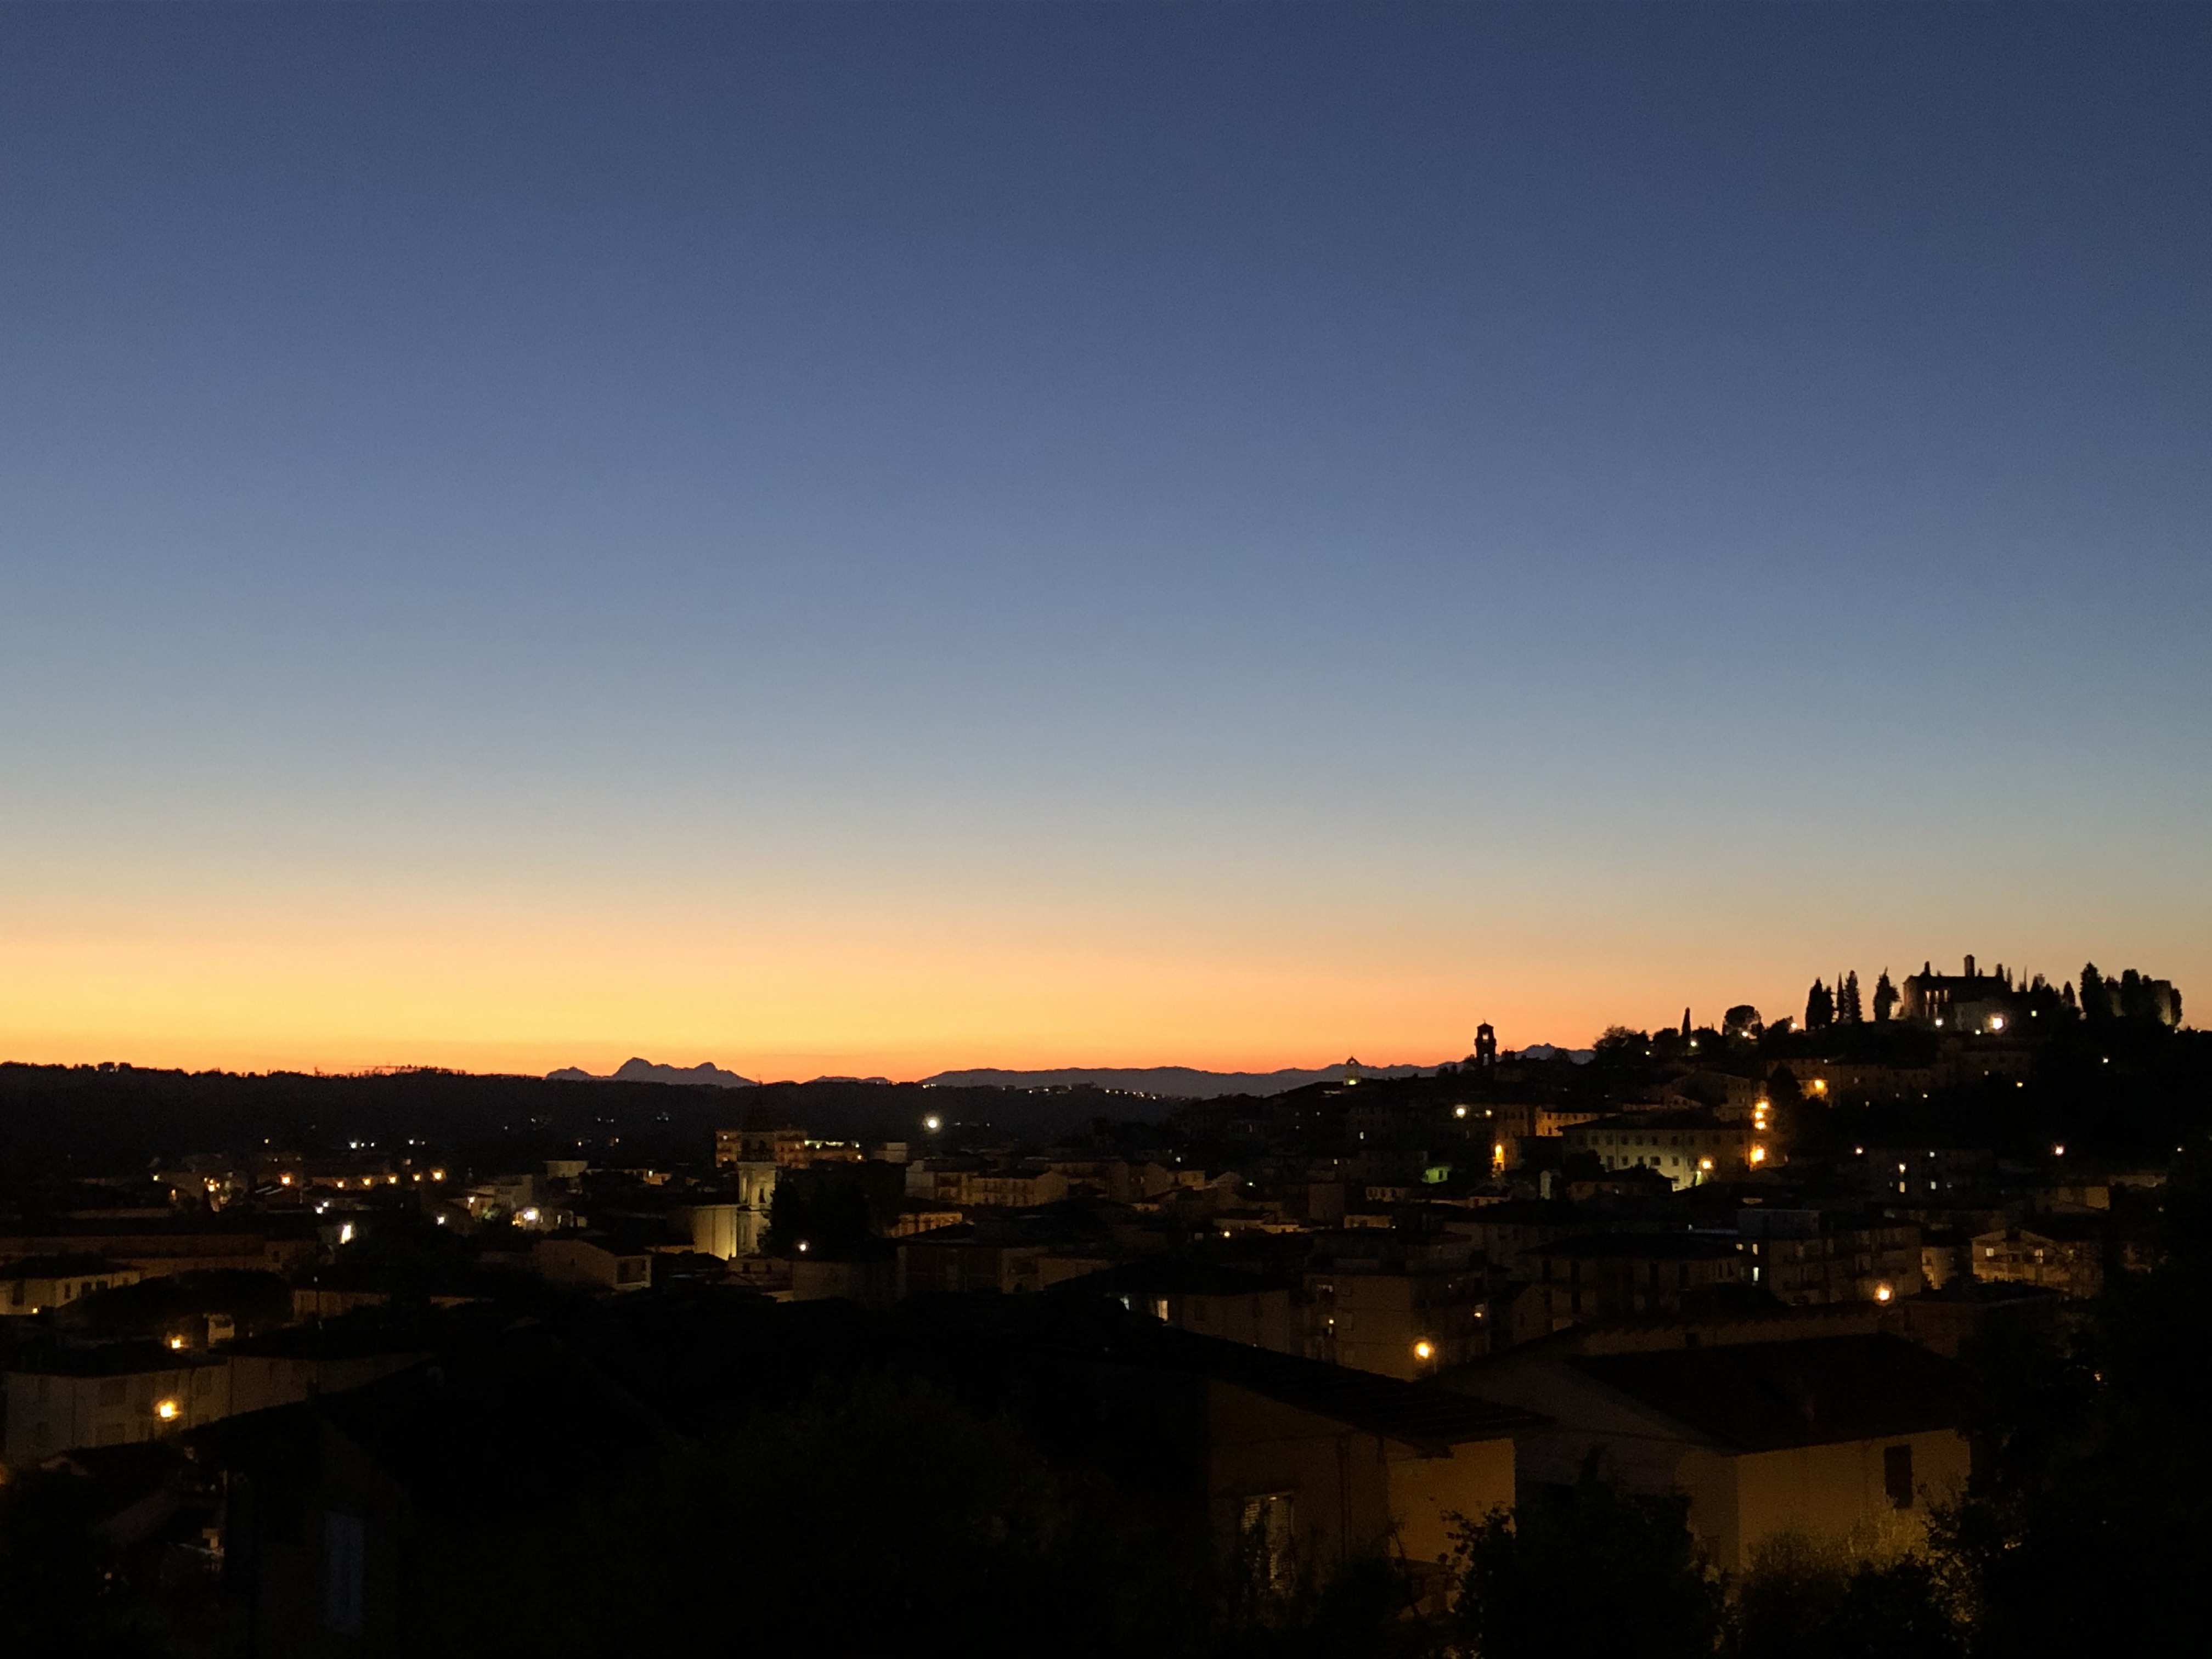 The view over Tuscany at dusk from Niccolò's home office. Photo c/o Niccolò Mazzei. 